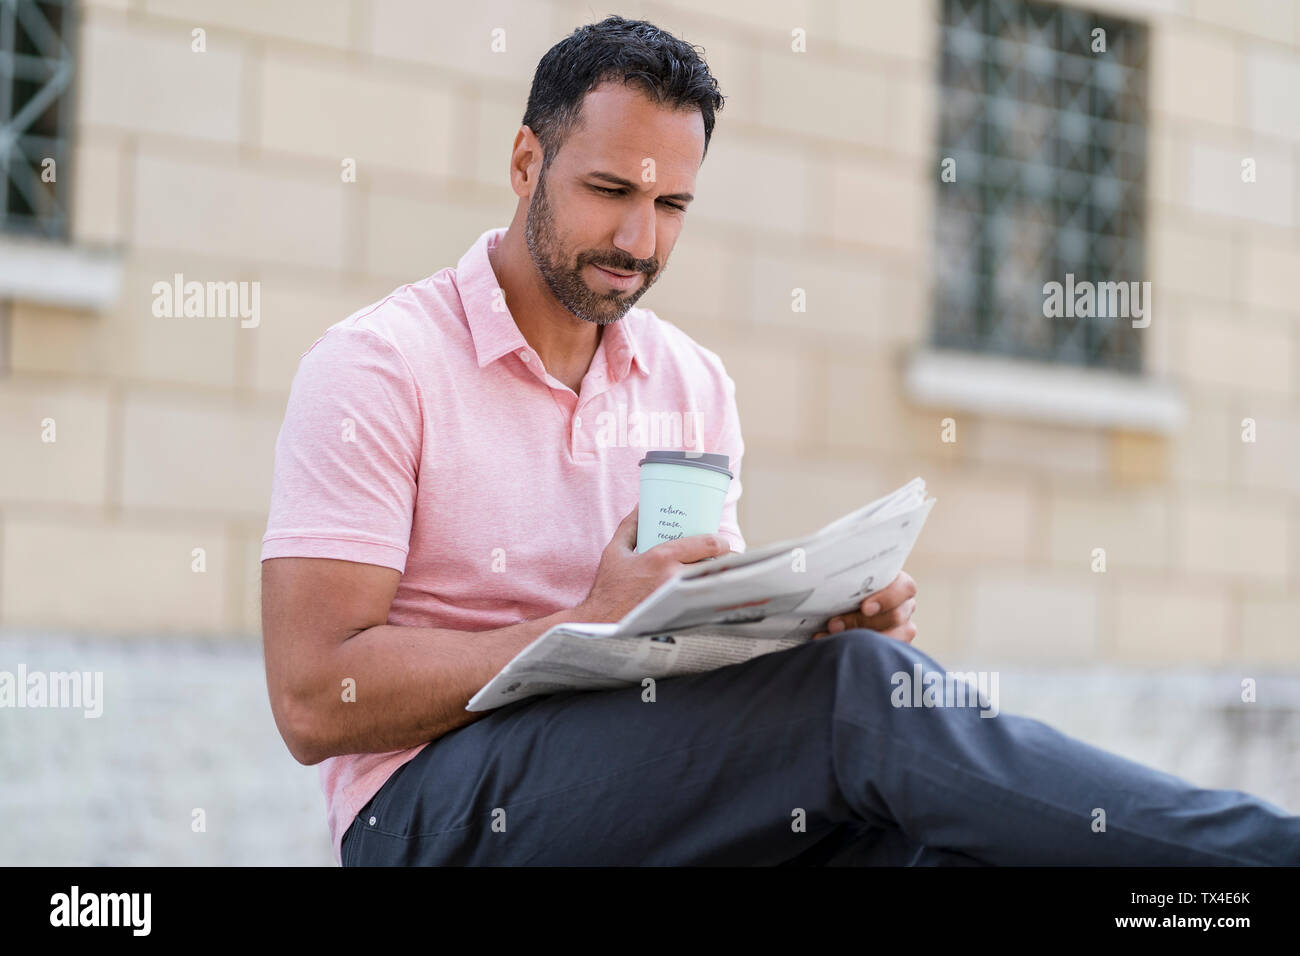 Man with takeaway coffee reading newspaper in the city Stock Photo